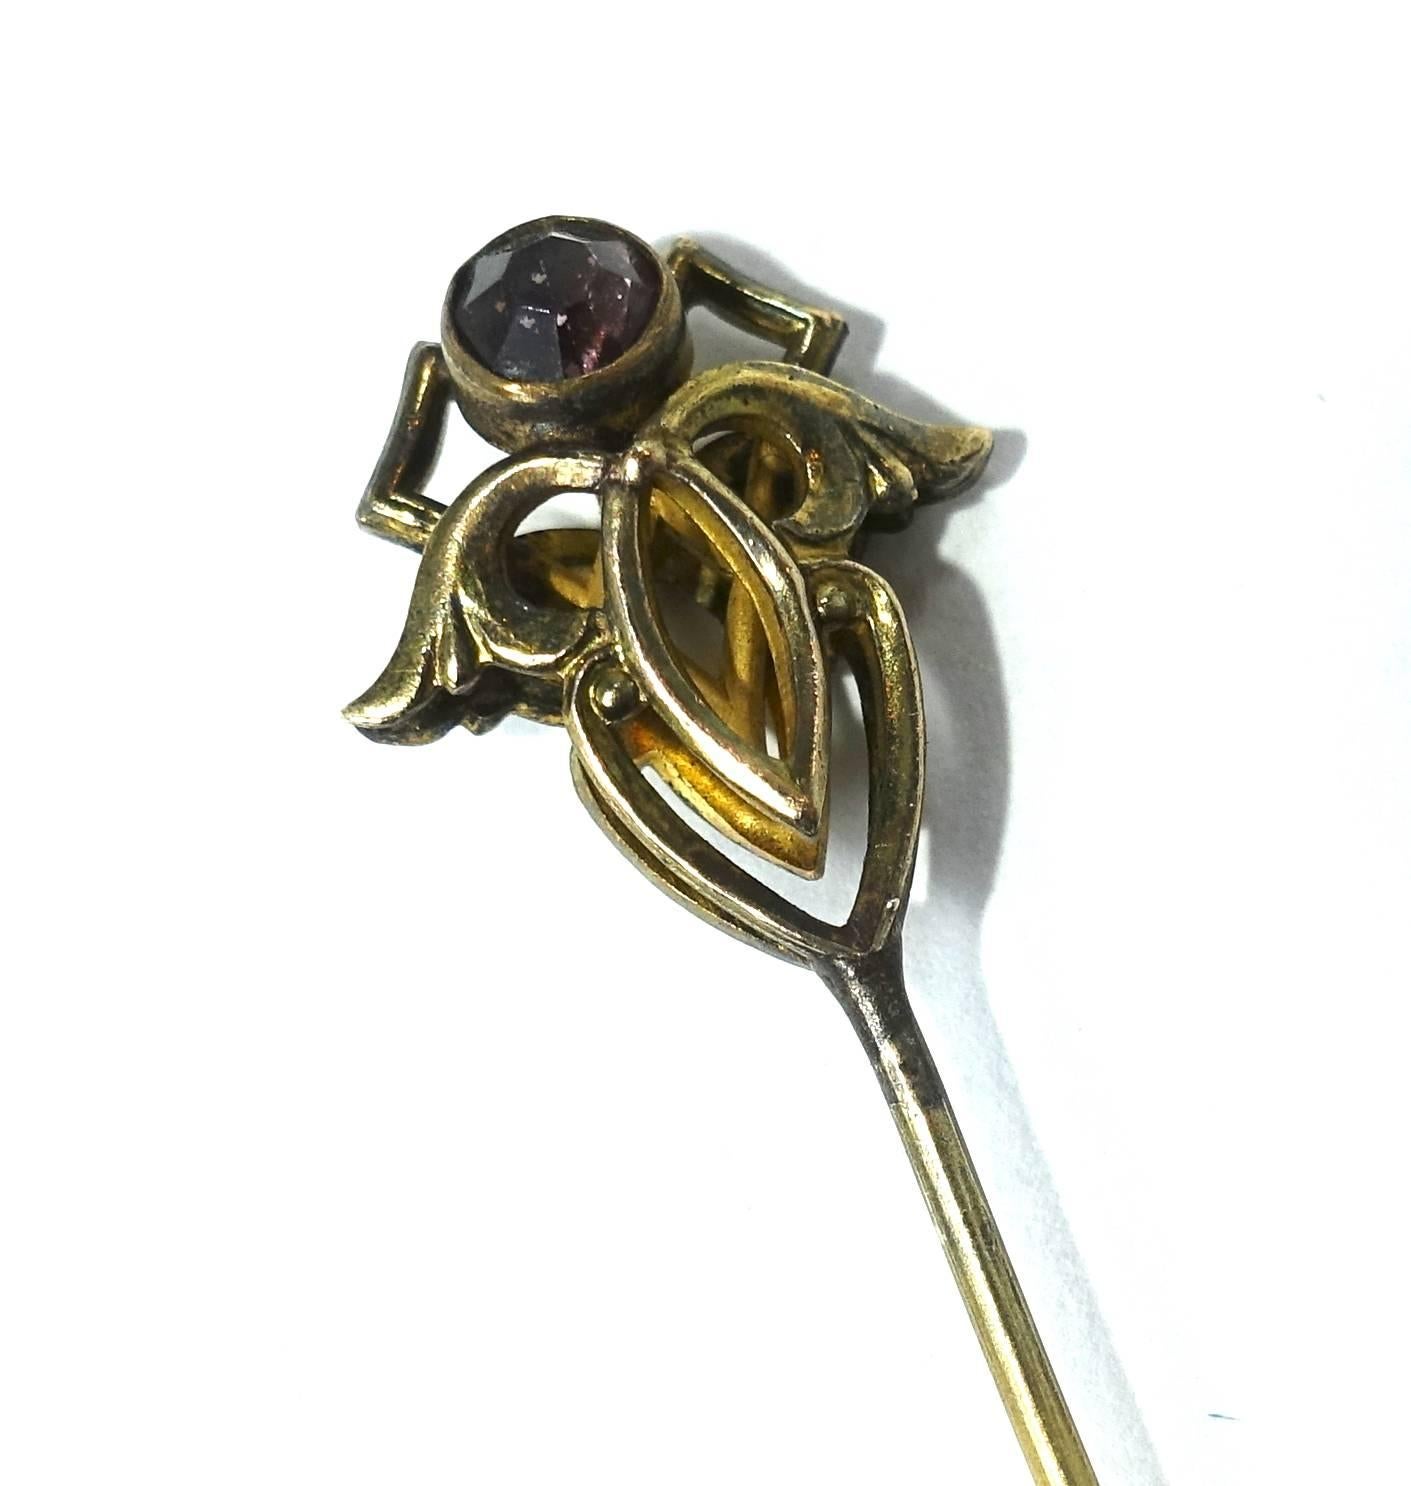 This early 1900s vintage stick-pin features an amethyst stone in a gold tone setting.  In excellent condition, this pin measures 3-1/8” long and 1/2” on the top.